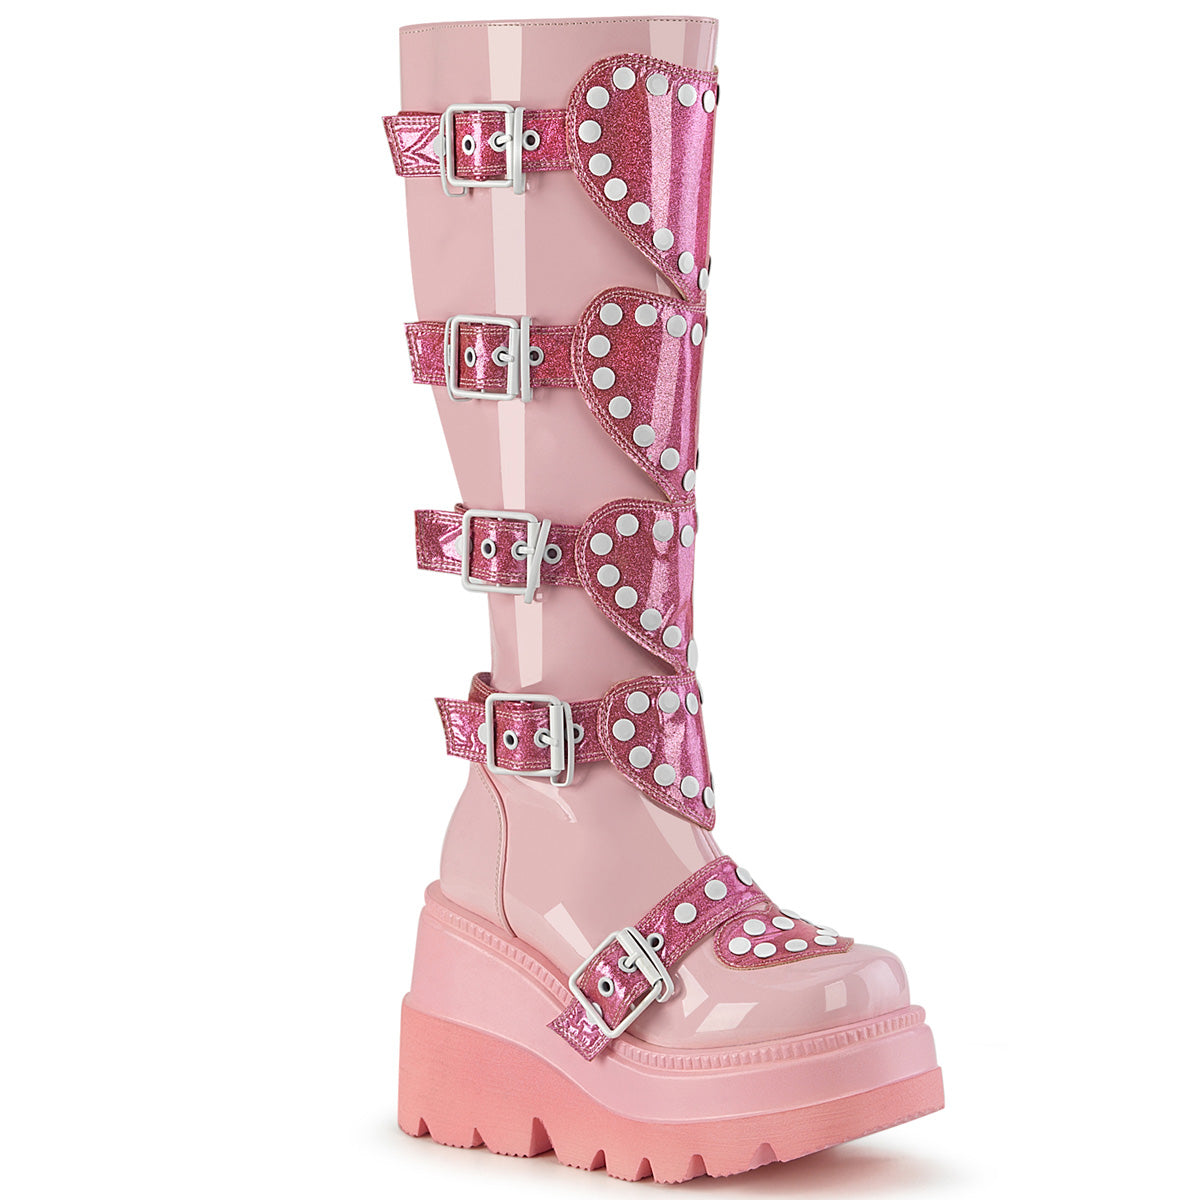 SHAKER-210 - Baby Pink Patent Boots